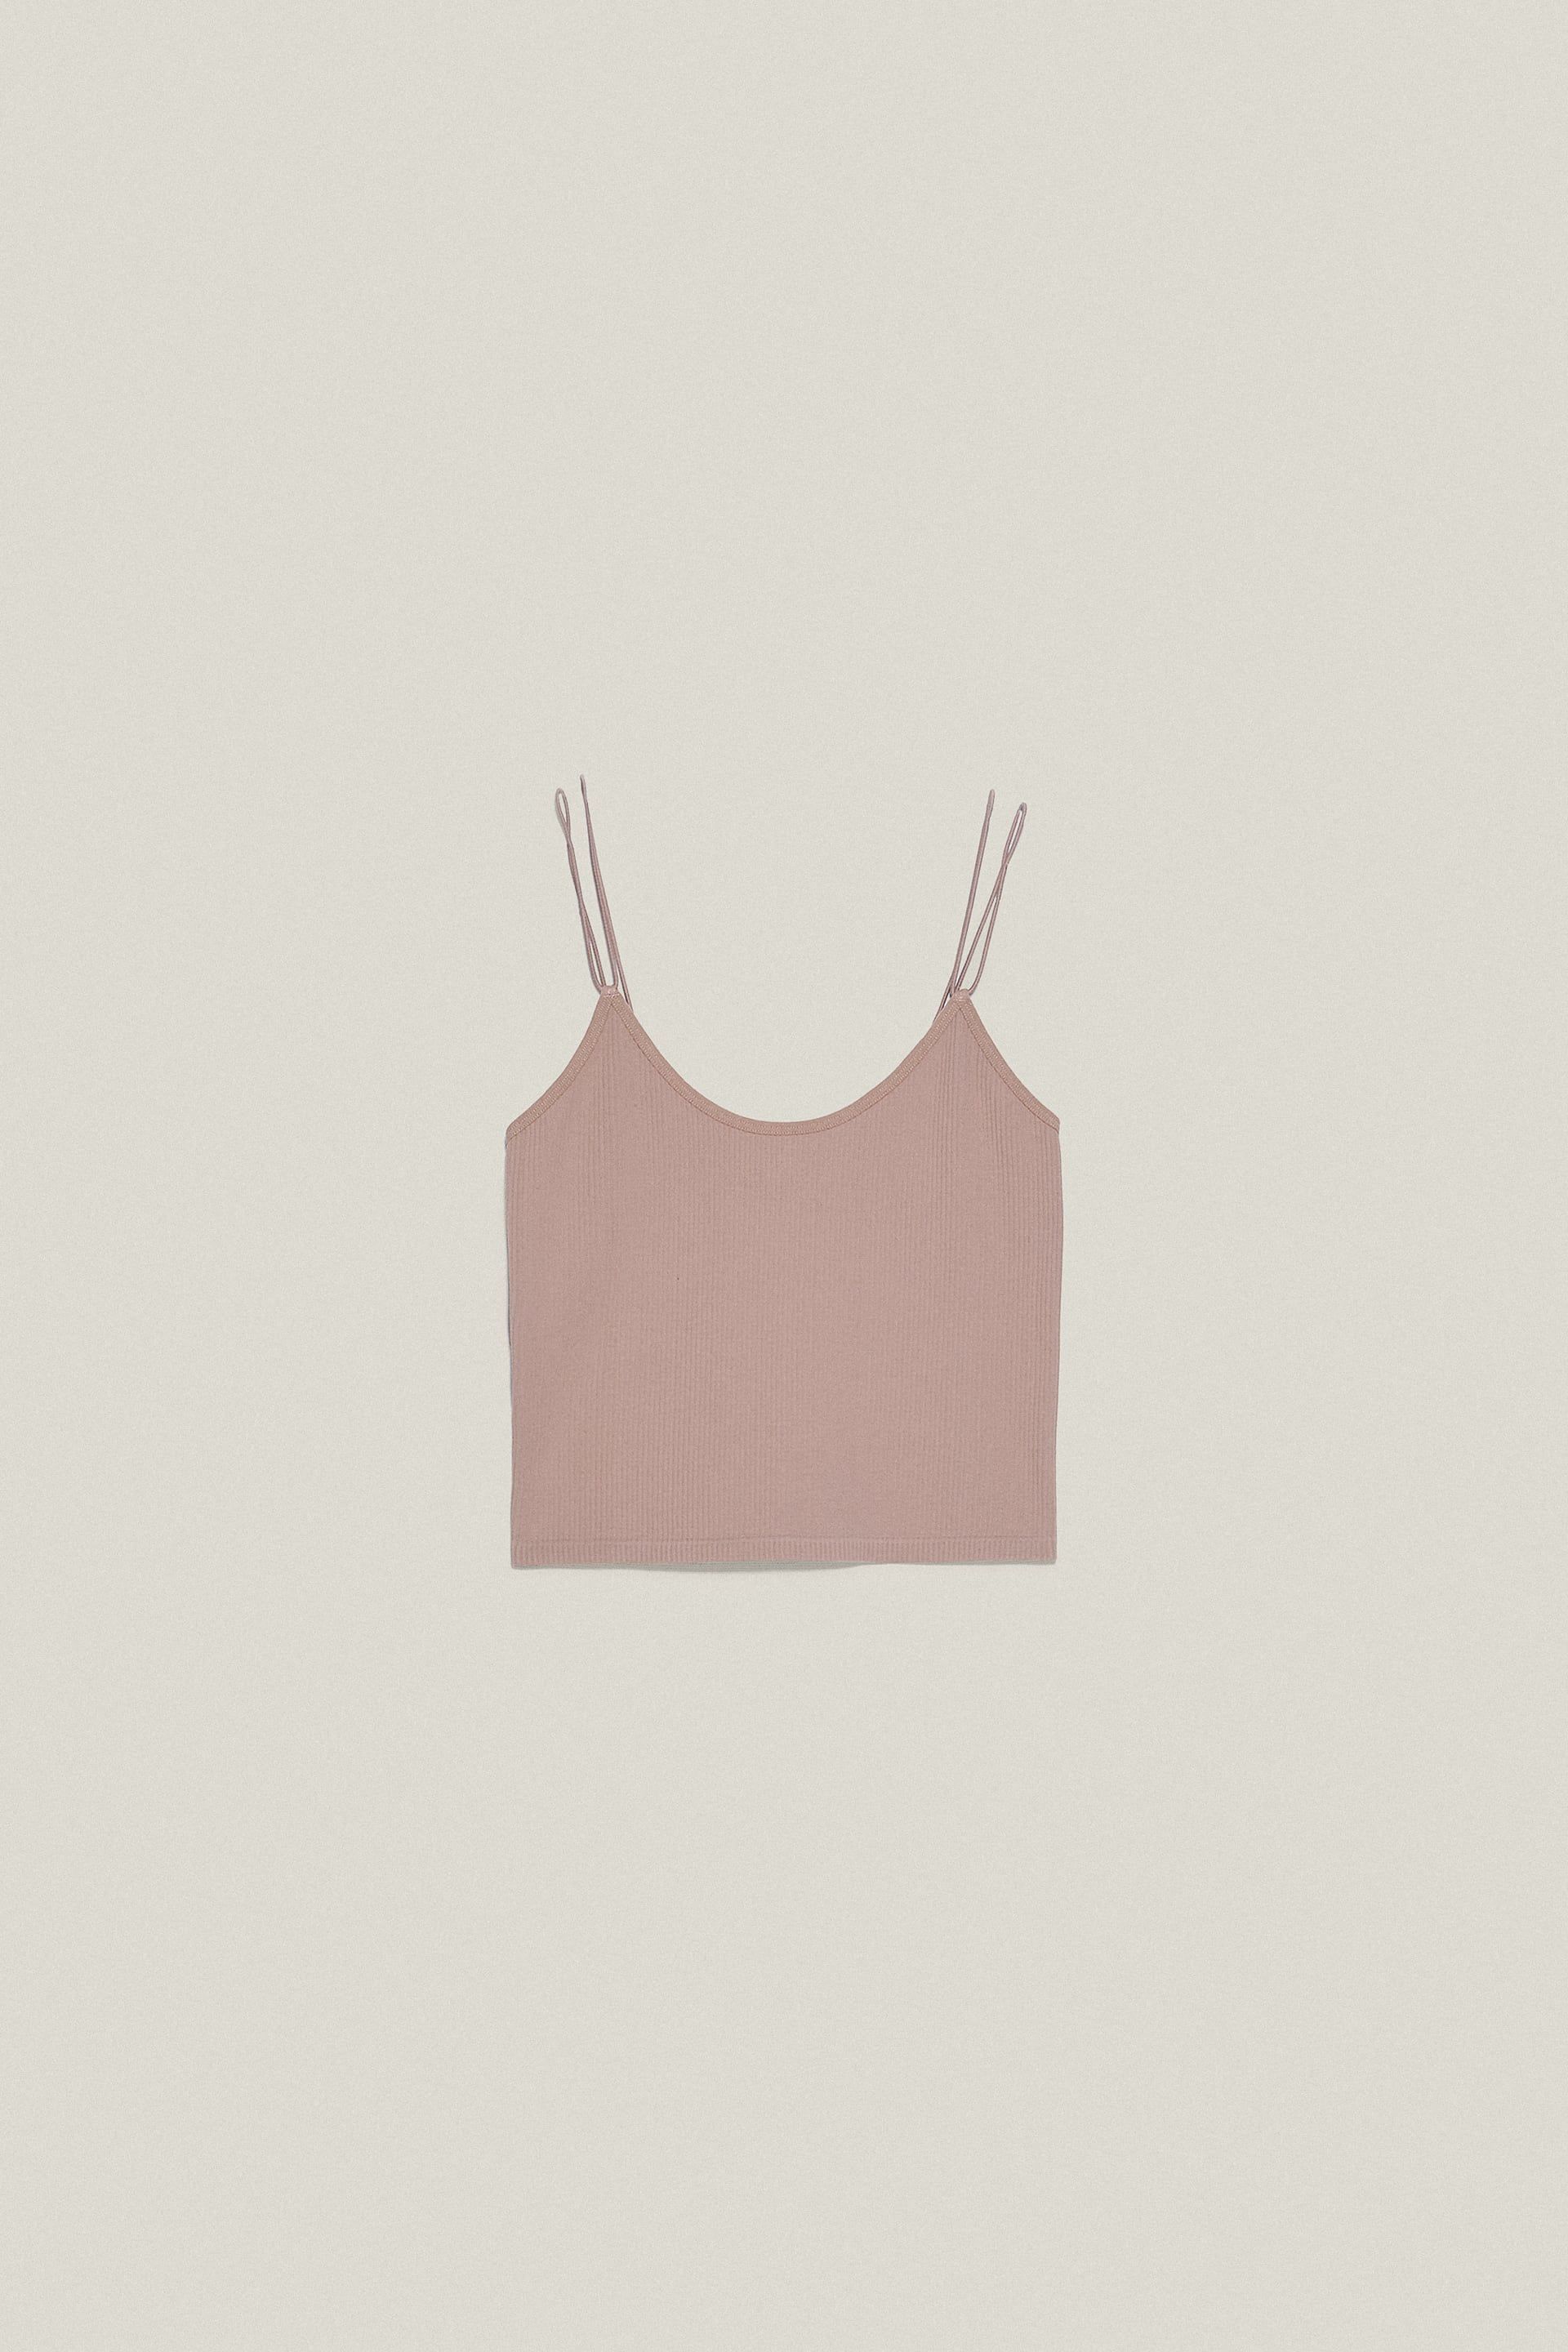 ZARA limitless, contour, collection tank, size small - $19 New With Tags -  From Tarah